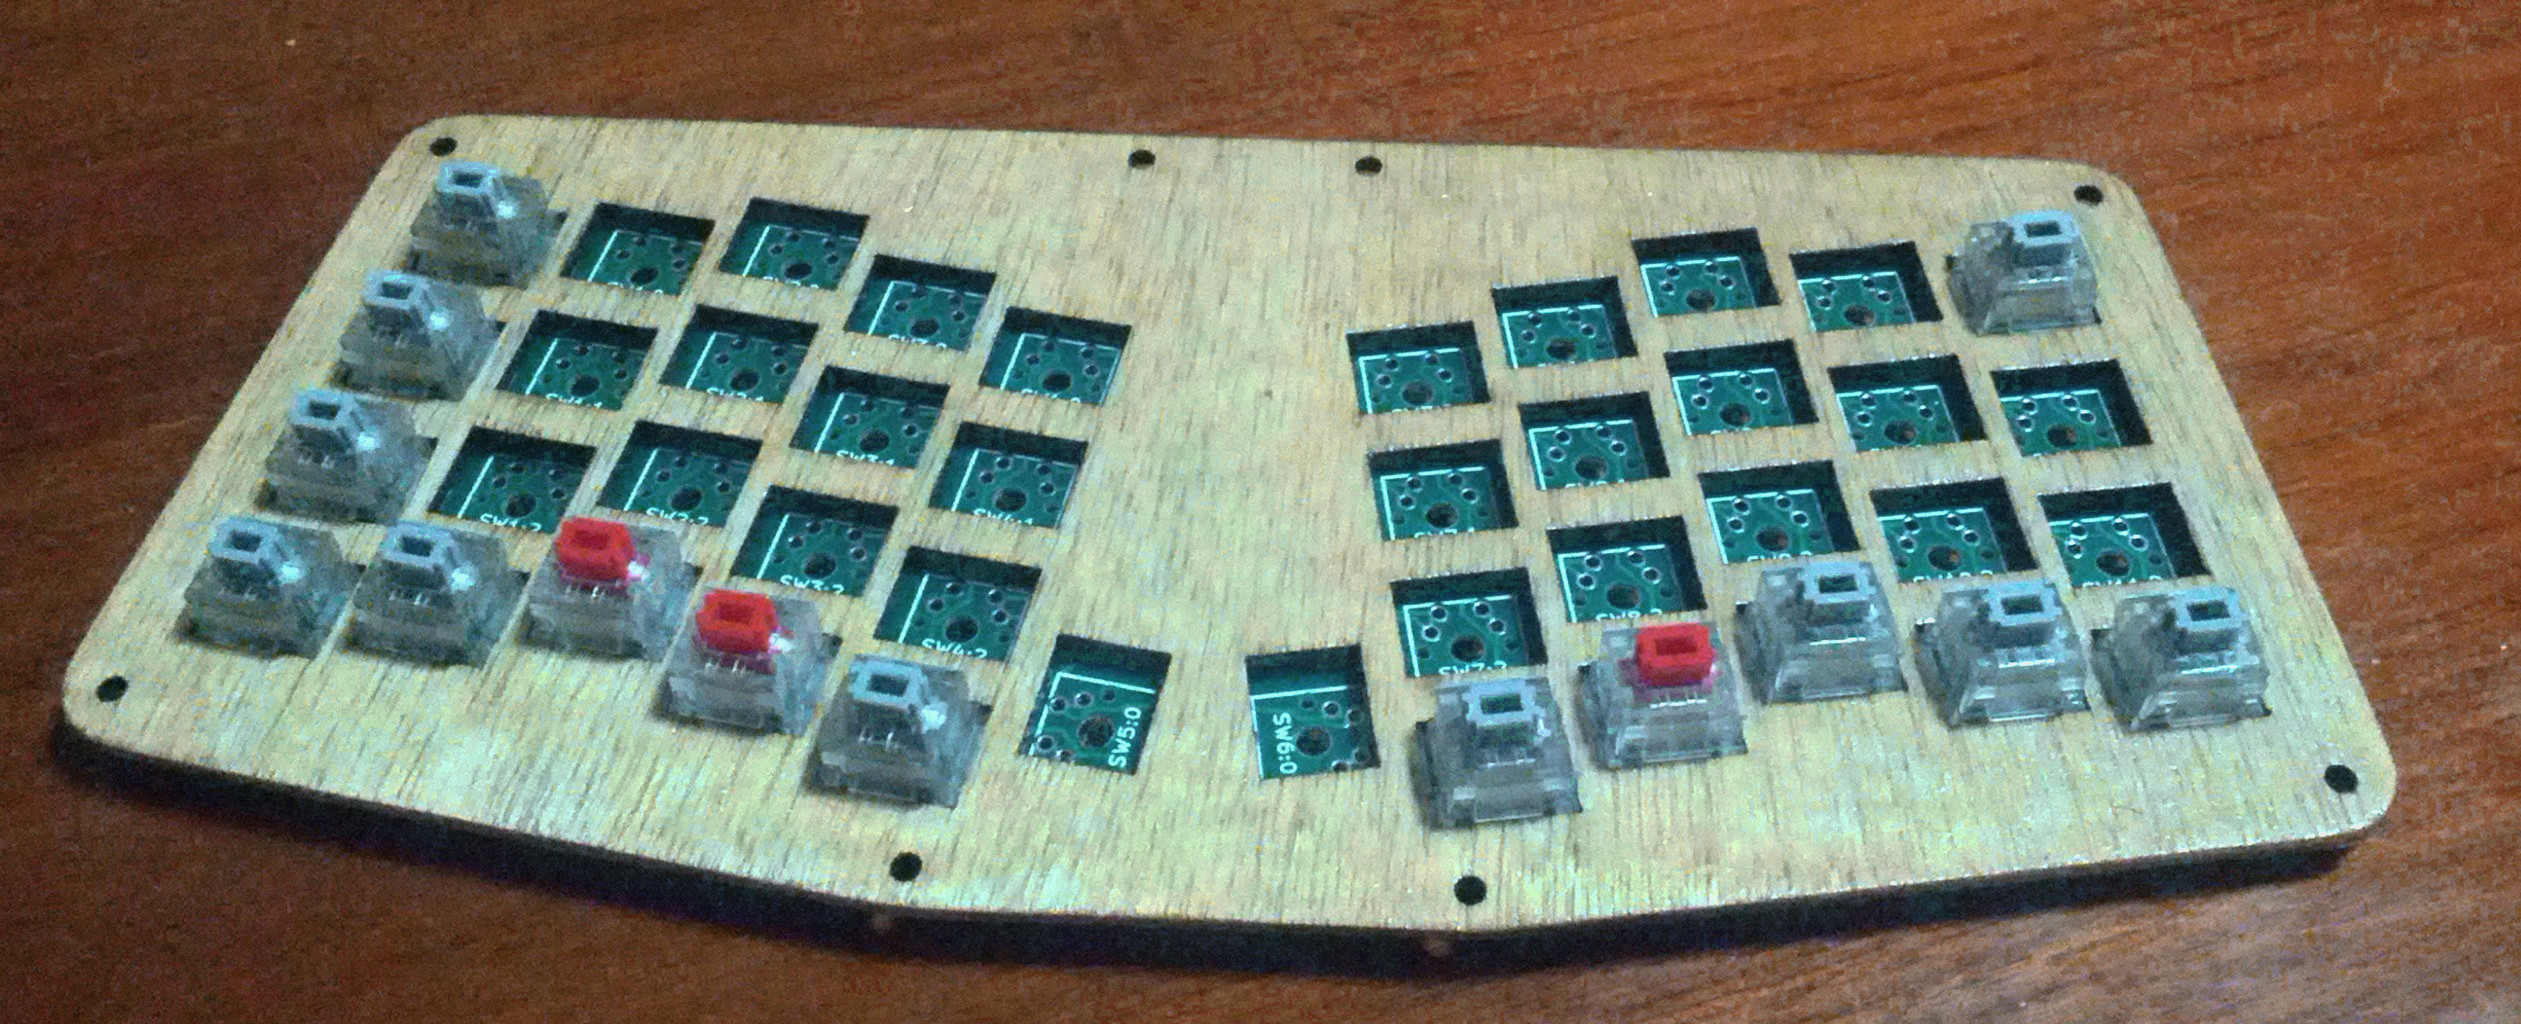 assembly/some-switches.jpg